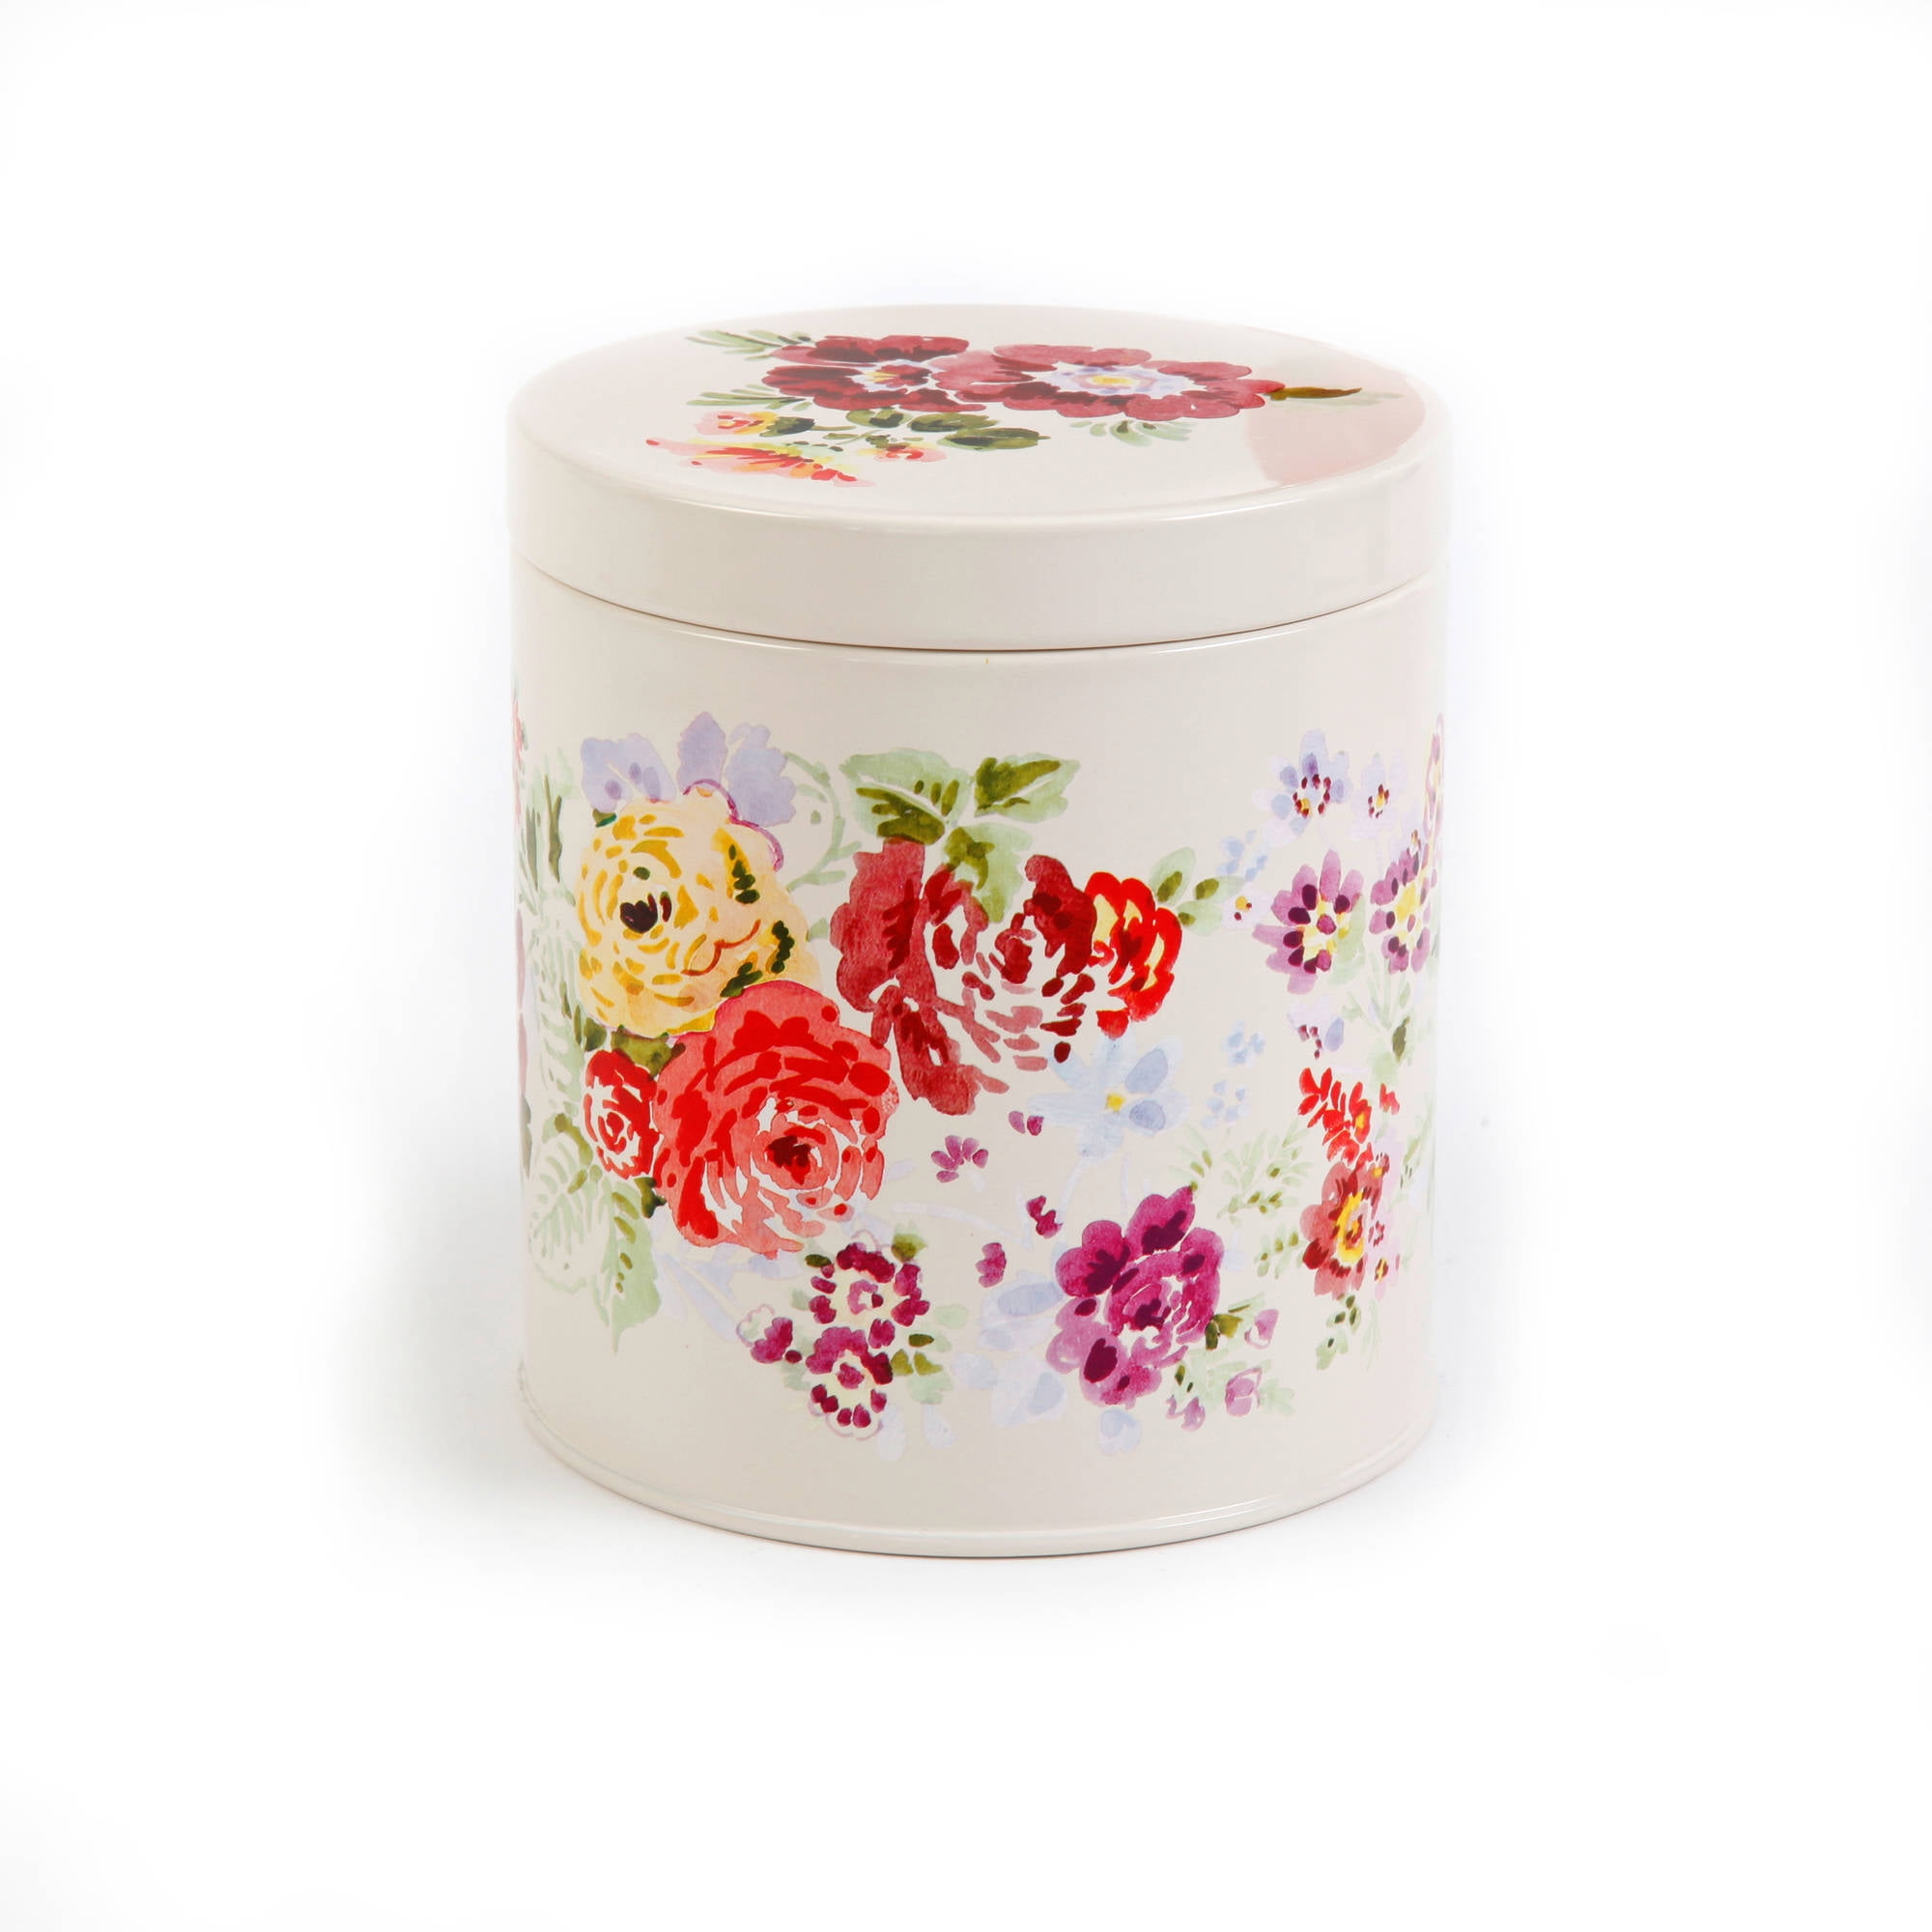 Last Set 🌺🛍️ New Pioneer Woman Vegetable Keepers Canisters